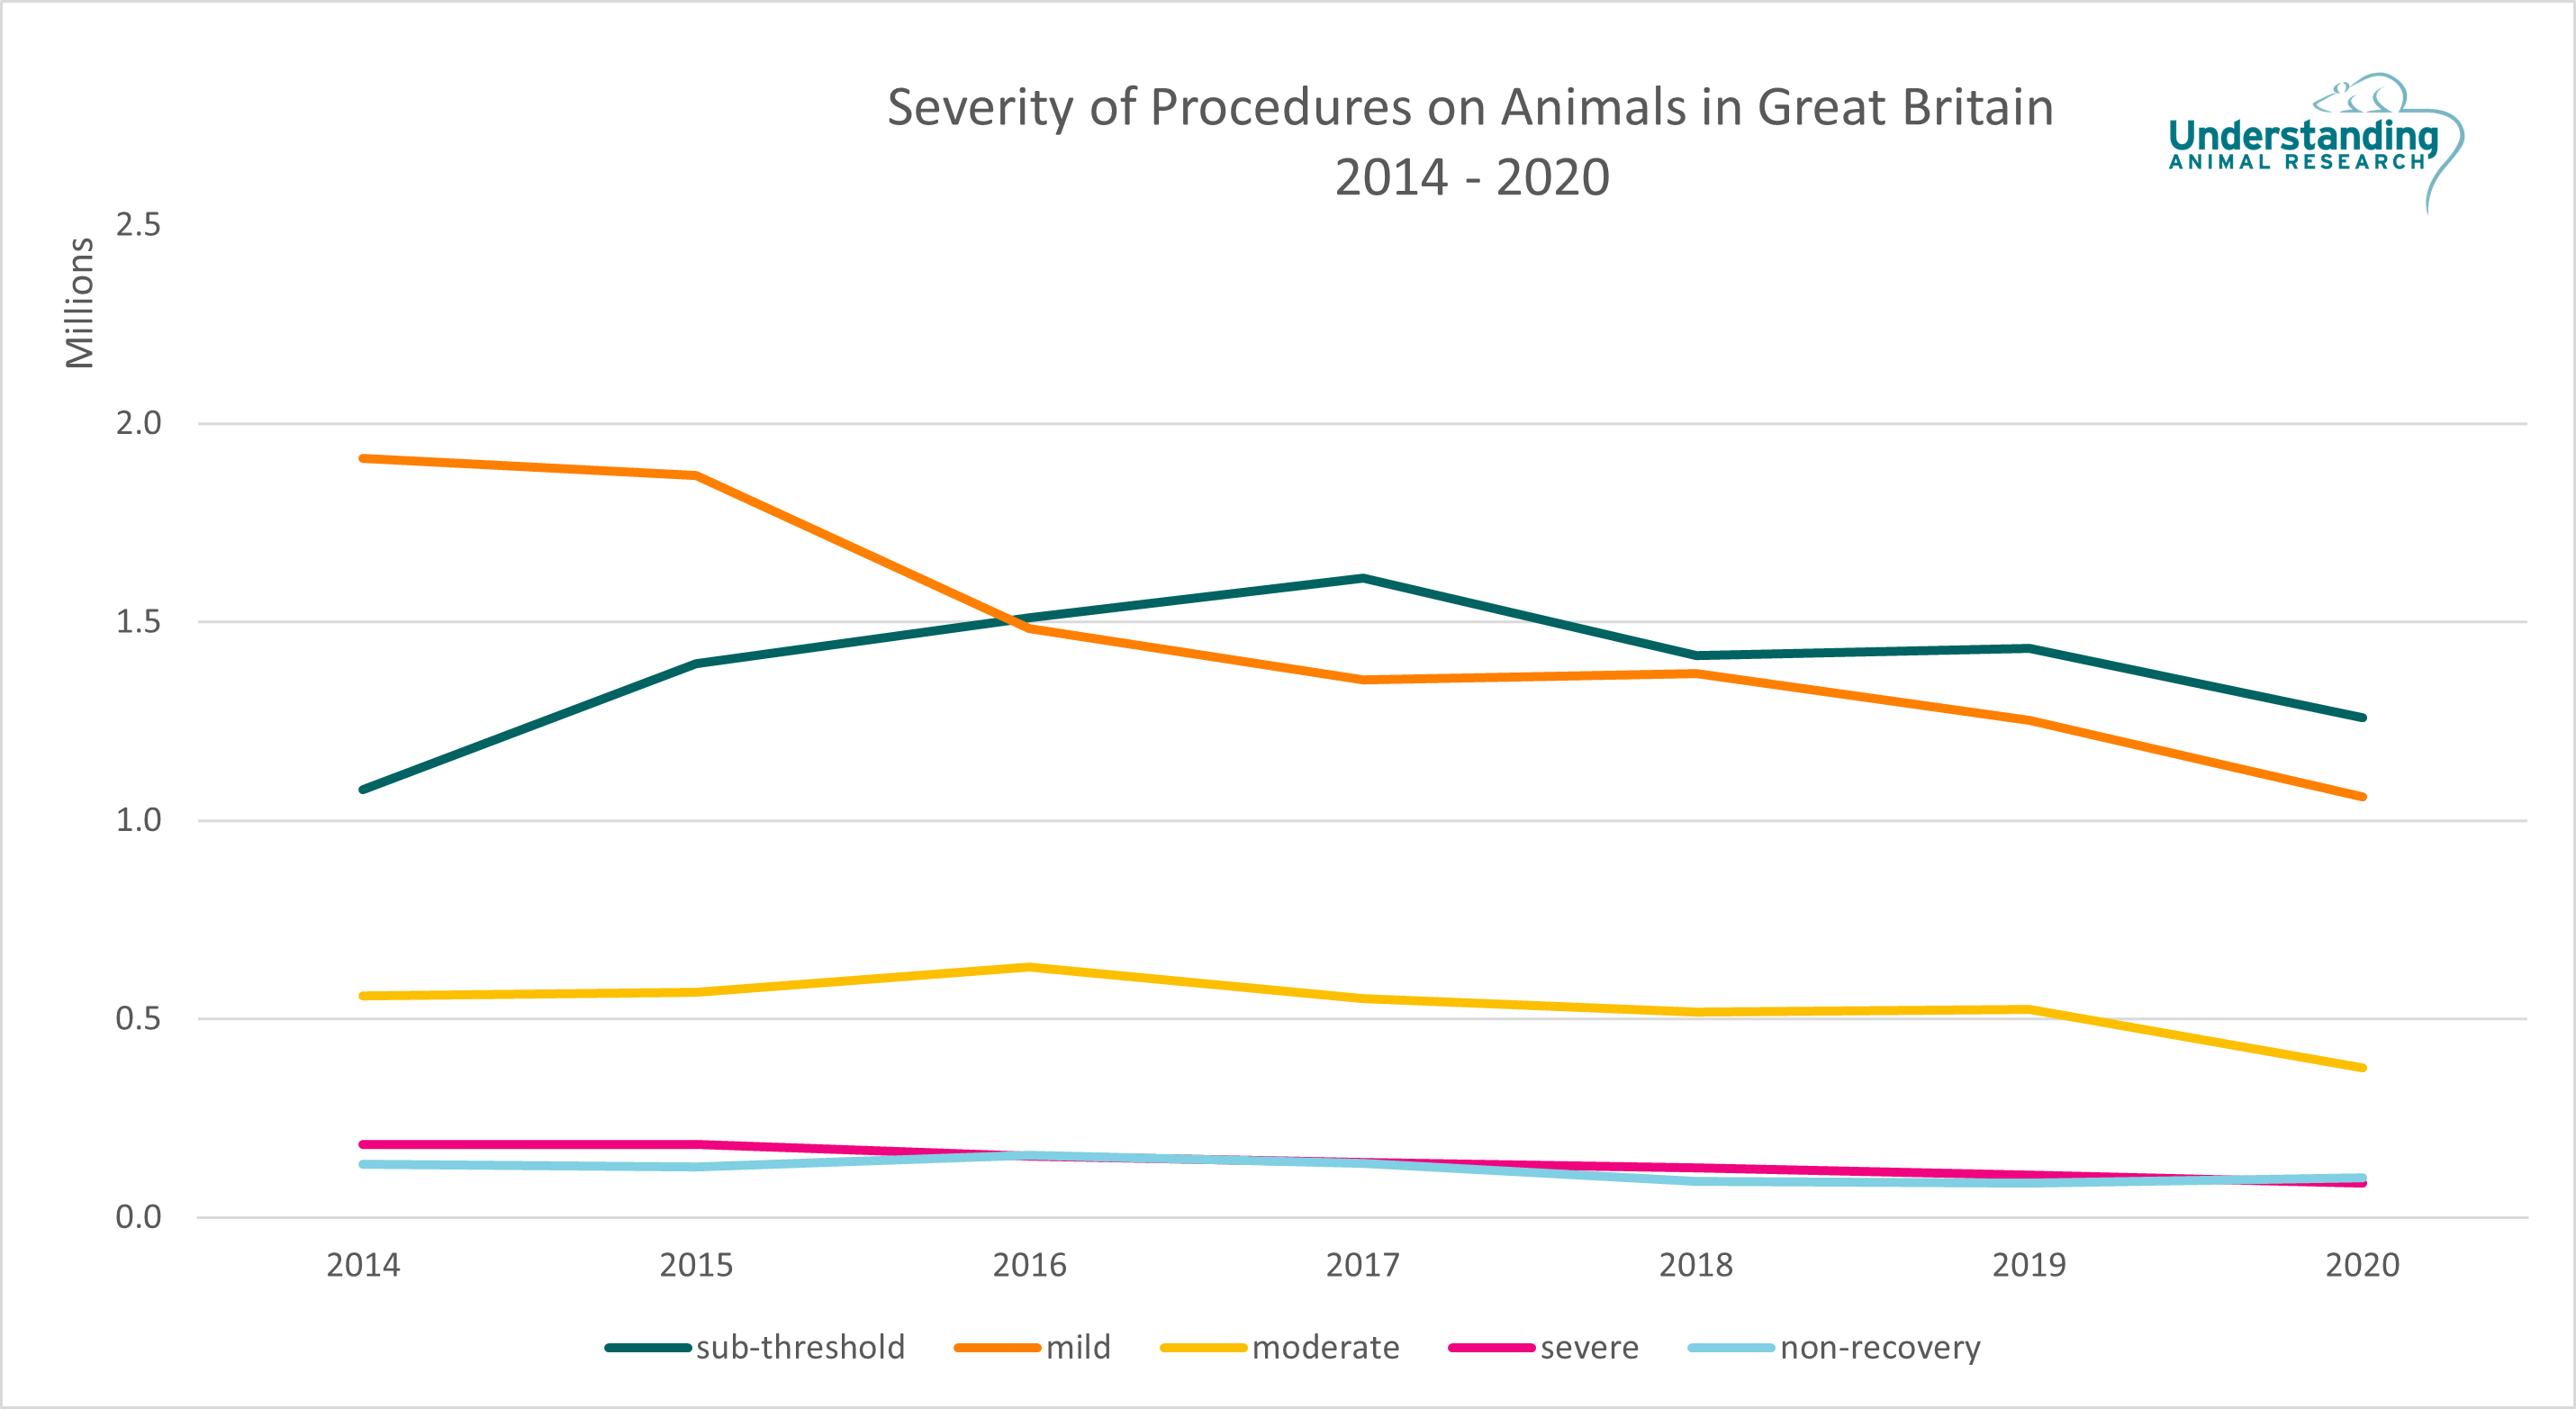 Severity_of_Procedures_on_Animals_in_Great_Britain_2014-2020.png